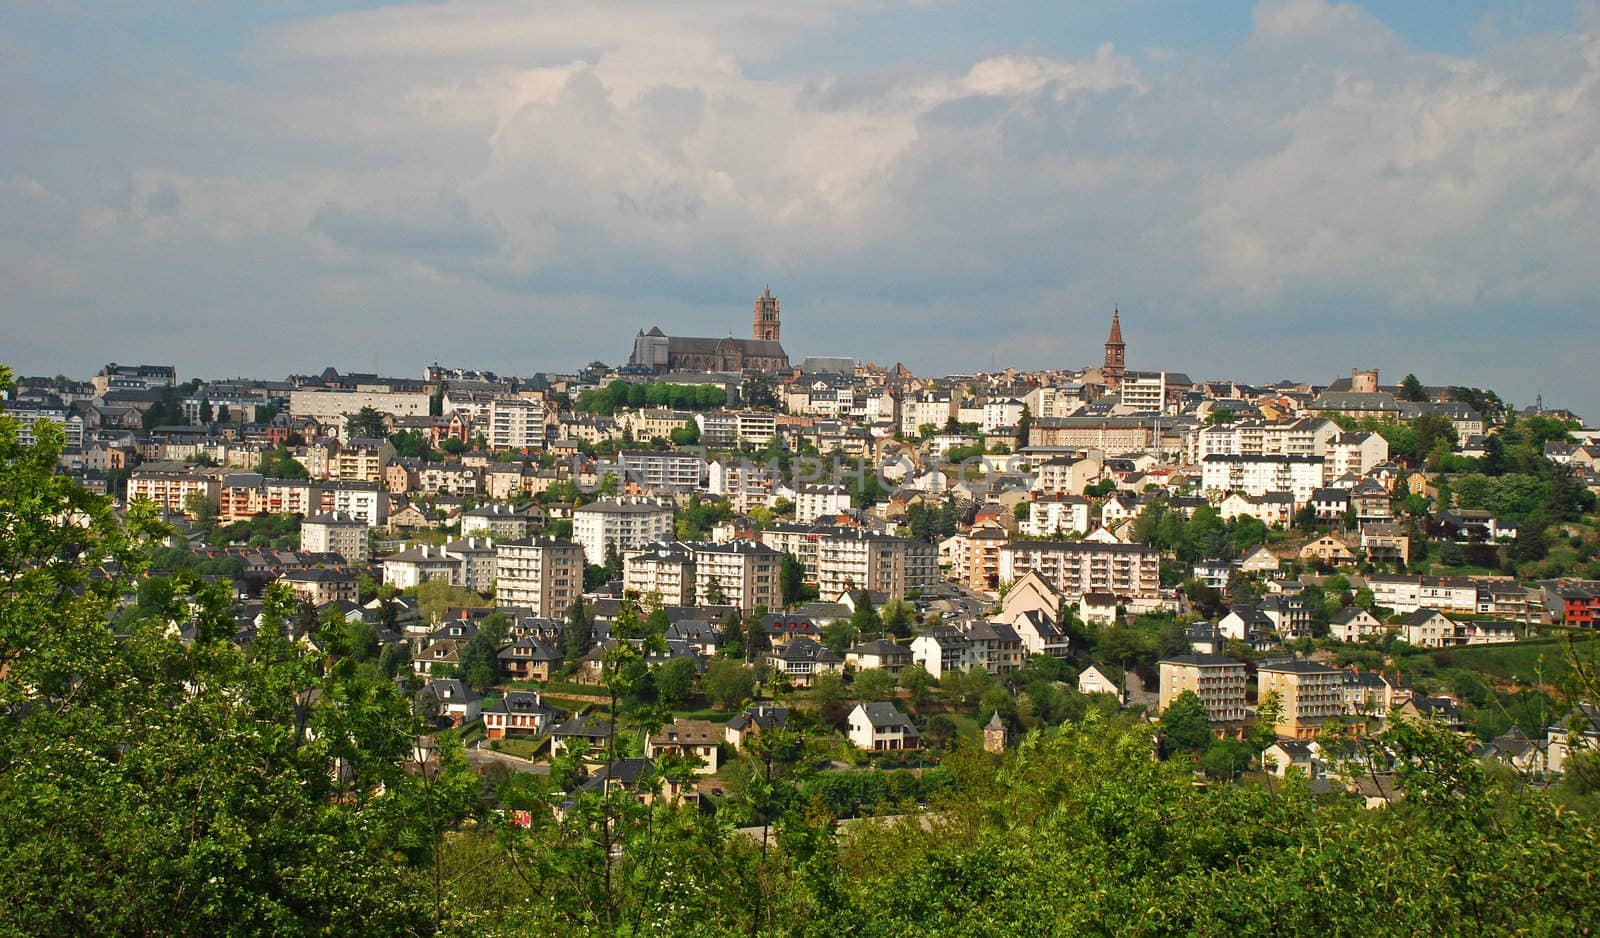 Approaching Rodez, the capital of Aveyron department in French Midi-Pyrenees regon. In this general vue we can see the Cath�drale Notre-Dame de Rodezin the top